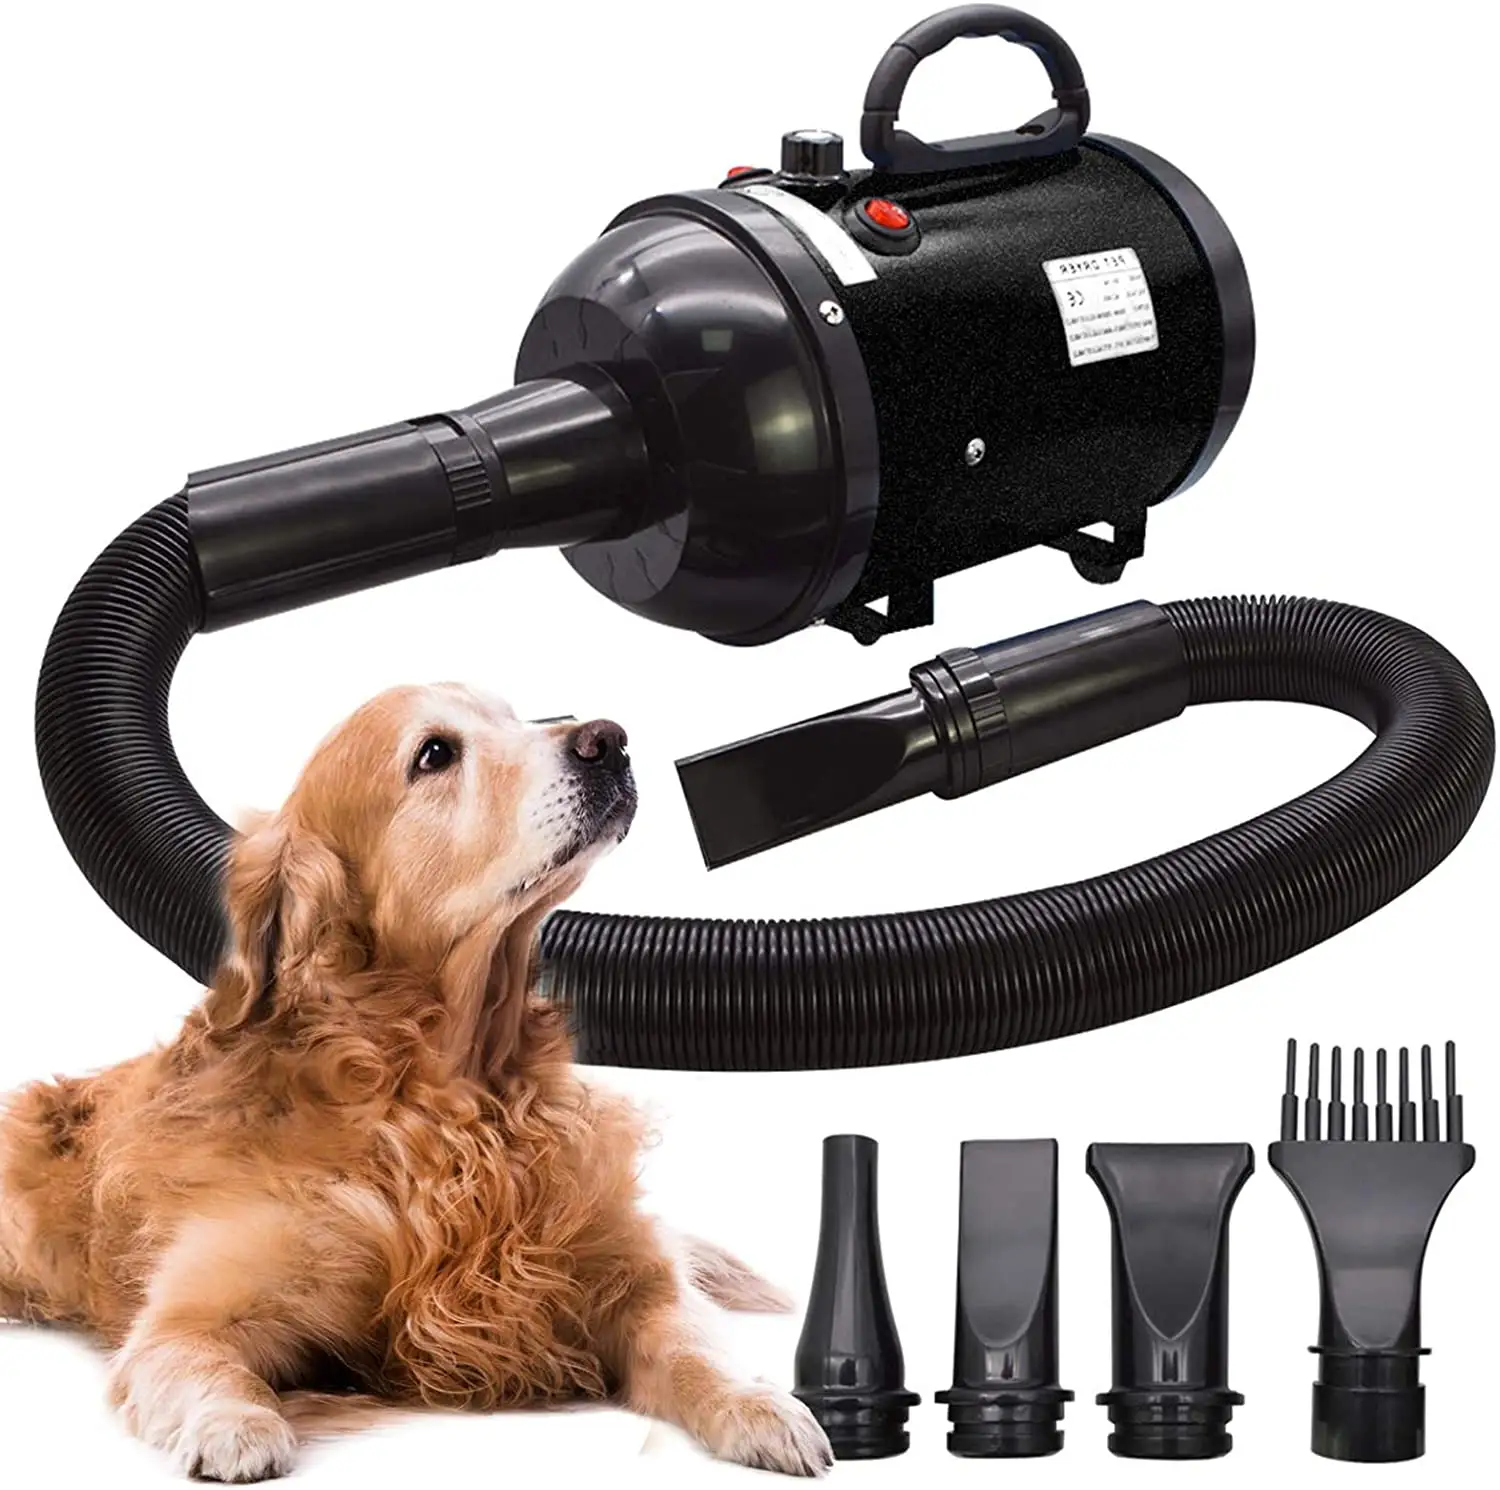 Stepless Adjustable Speed Temperature Pet Hair Dryers for Dog Grooming with 4 Different Nozzles